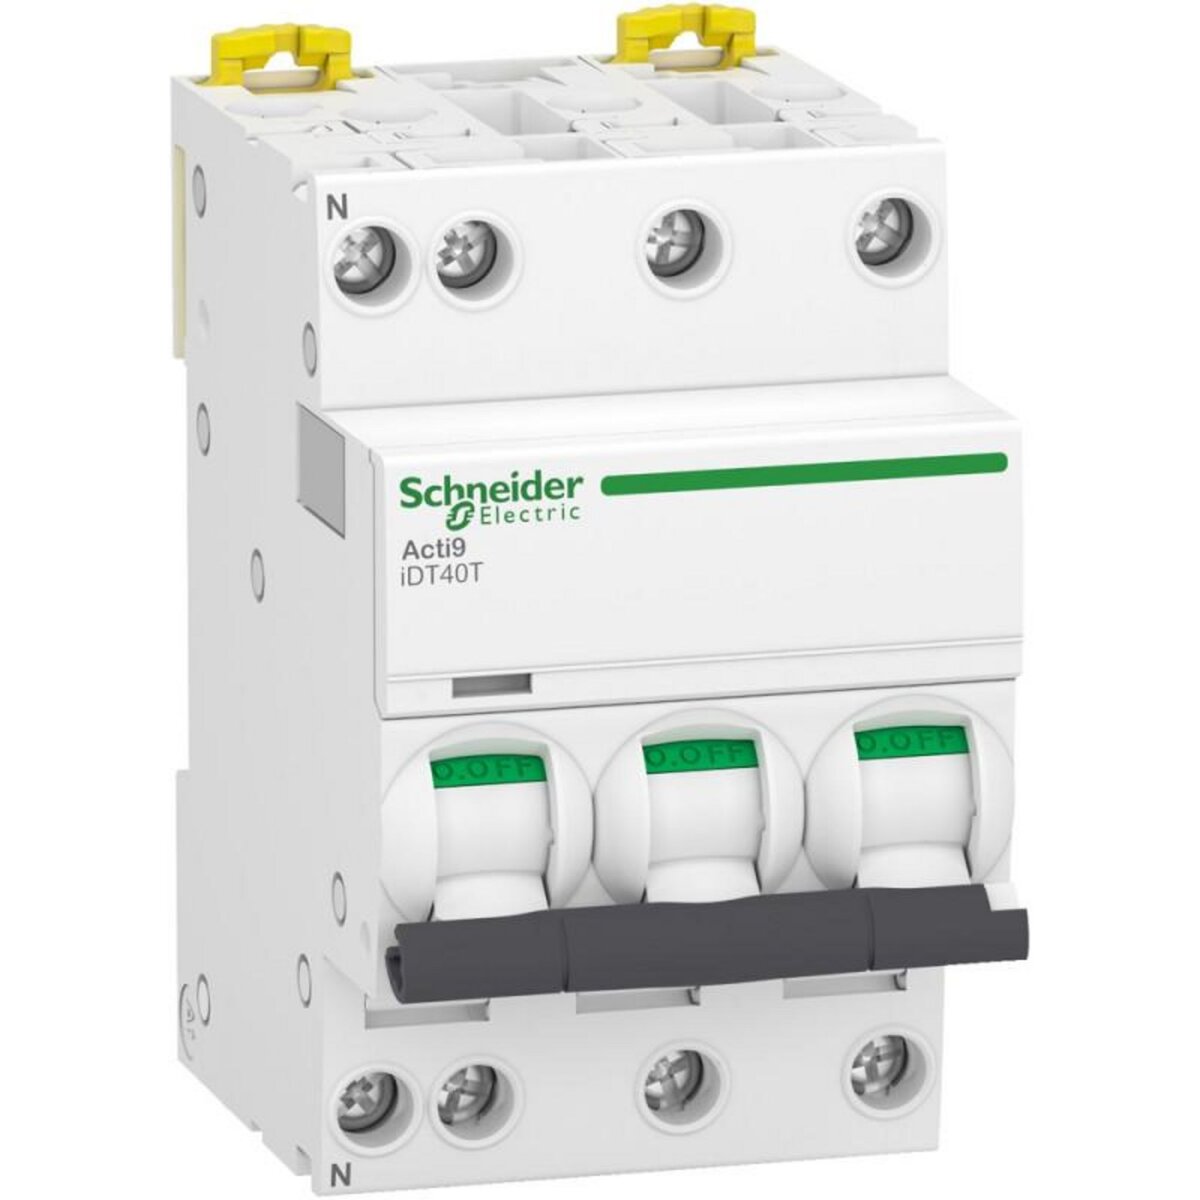 Schneider Electric Disjoncteur modulaire ACTI9 IDT40N 3P+N courbe C 6000A 10kA 20A SCHNEIDER ELECTRIC A9P24720